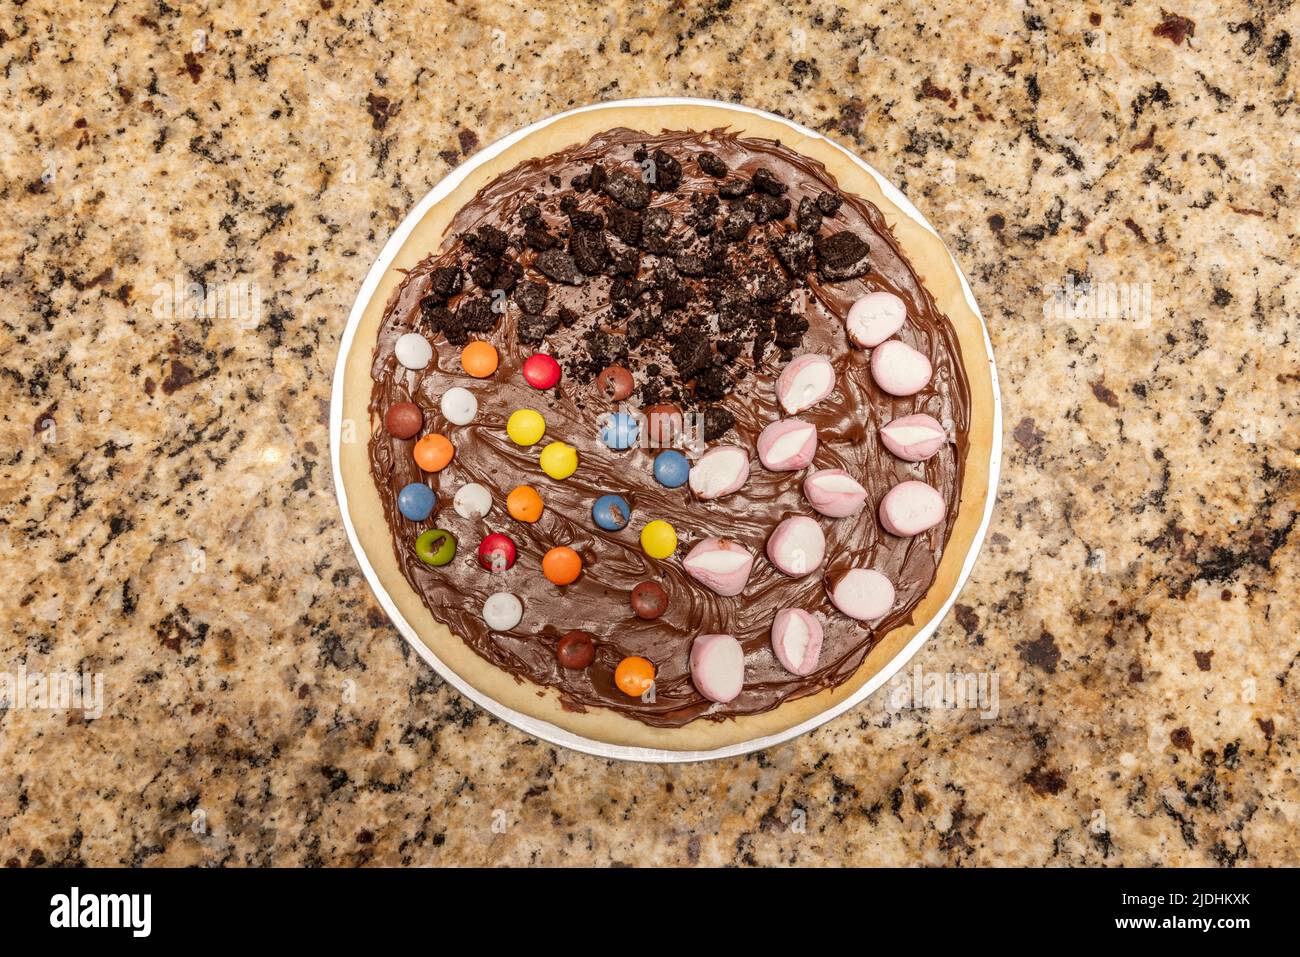 Sweet pizza with nutella, pieces of chocolate biscuit, marshmallows, assorted chocolate sprinkles on granite table Stock Photo